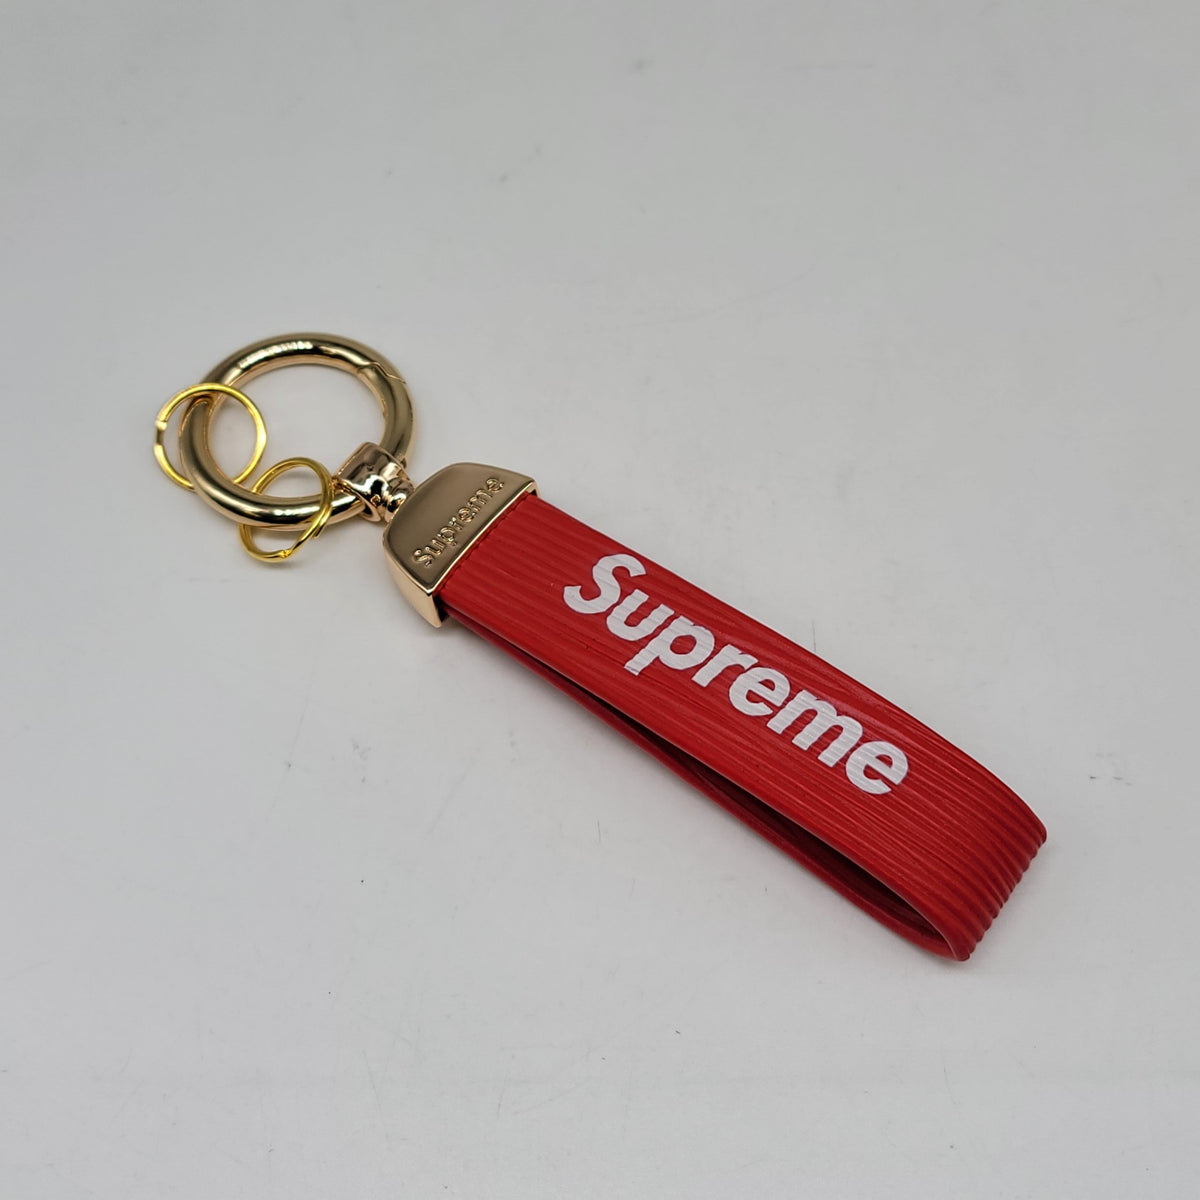 BRAND NEW SUPREME RED PENDANT WITH CALF LEATHER KEYCHAIN KEY RING TAG